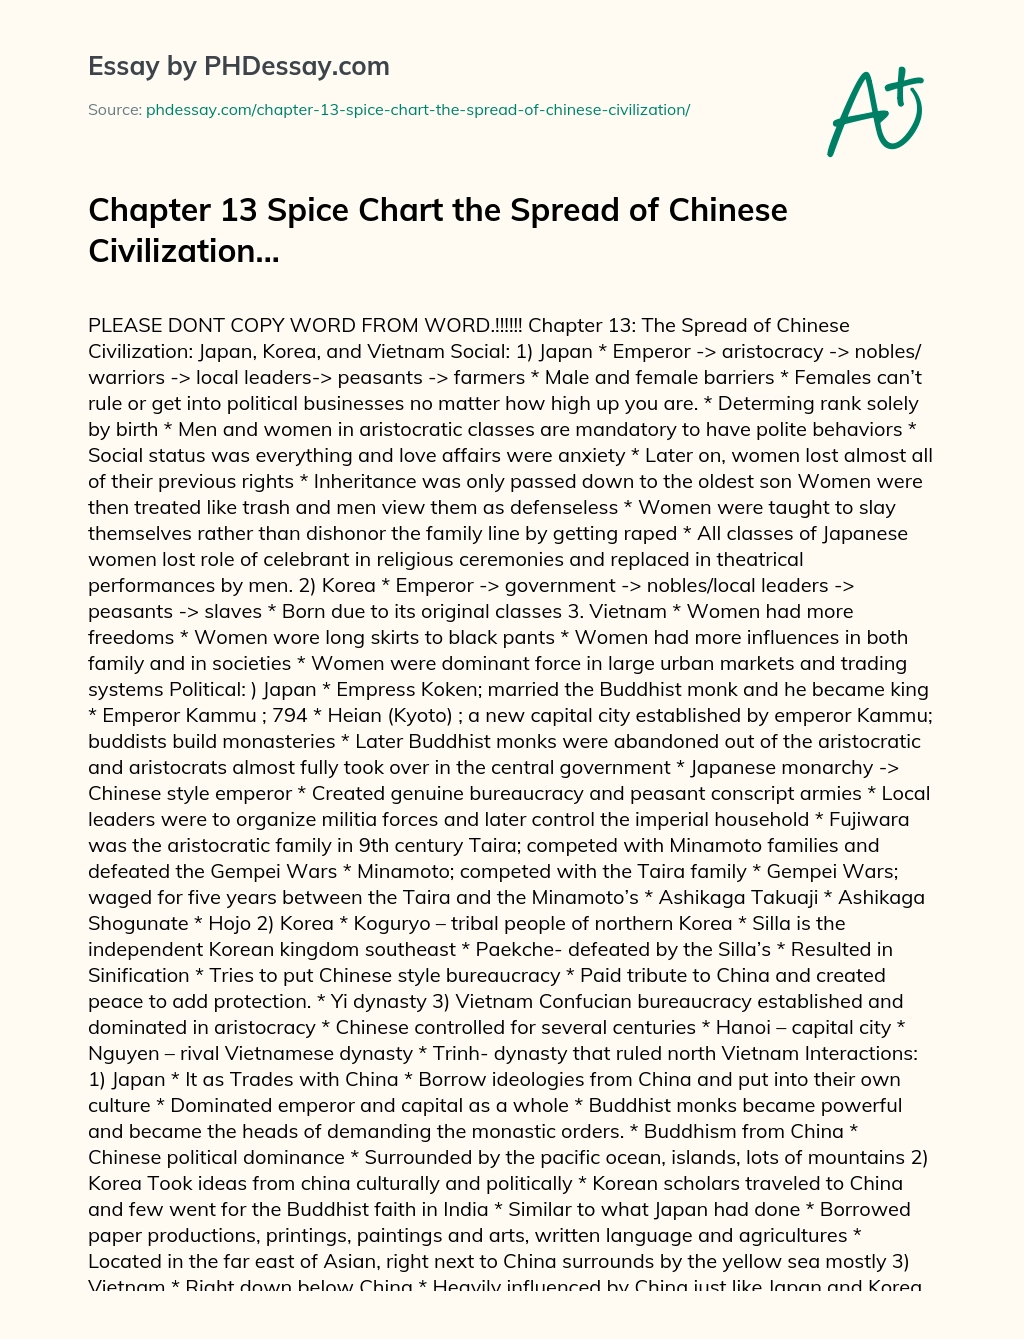 Chapter 13 Spice Chart the Spread of Chinese Civilization… essay